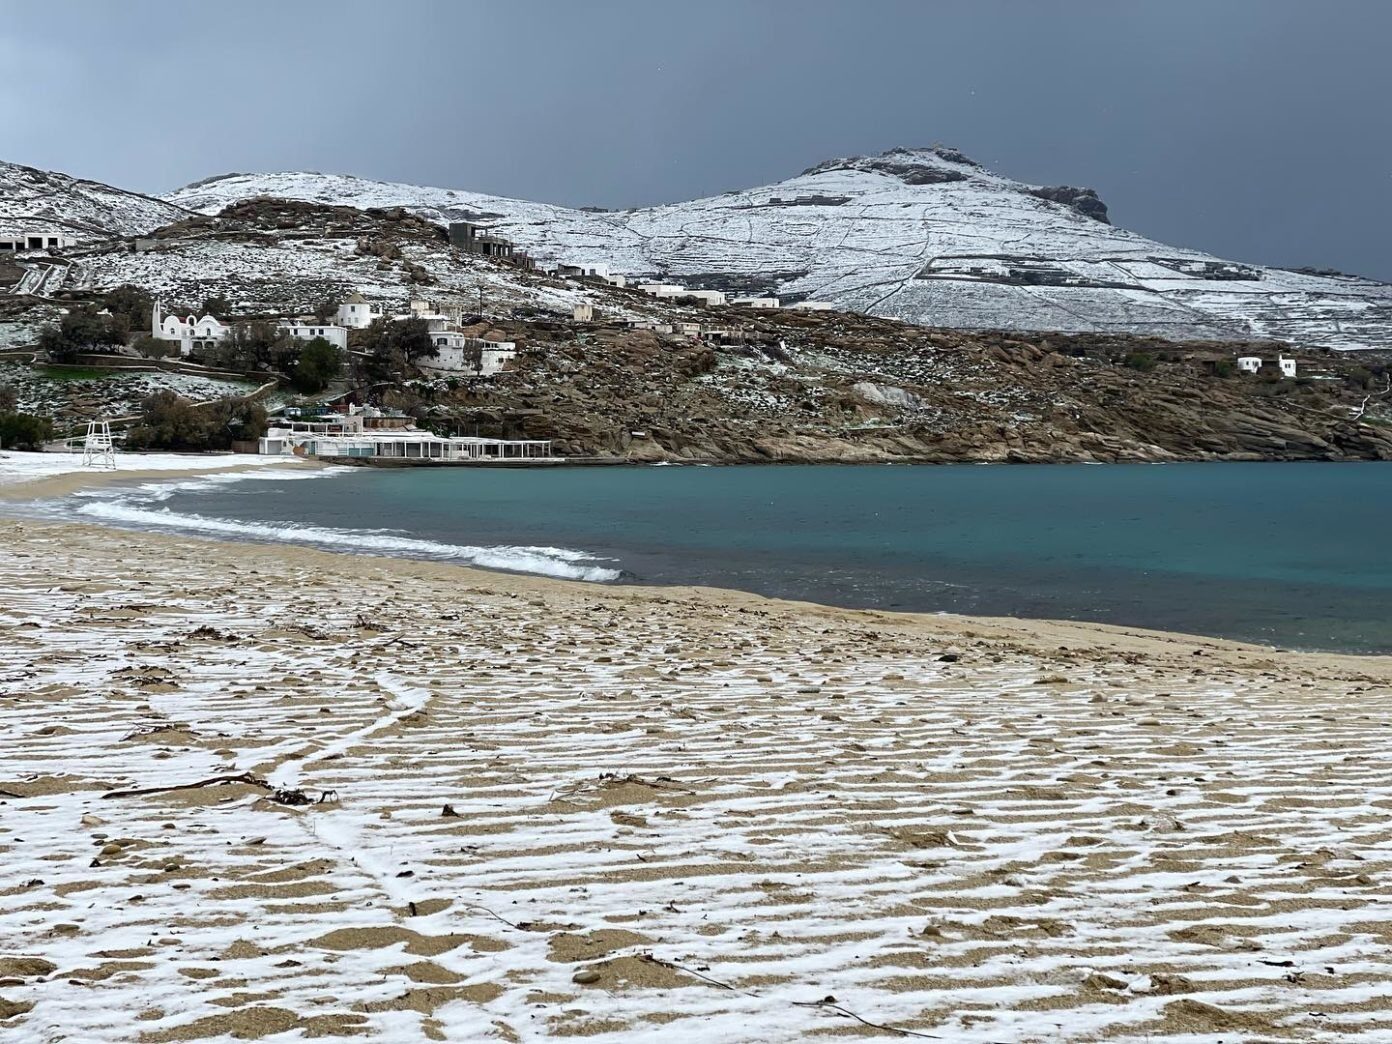 The famous beaches of Mykonos are covered in snow.